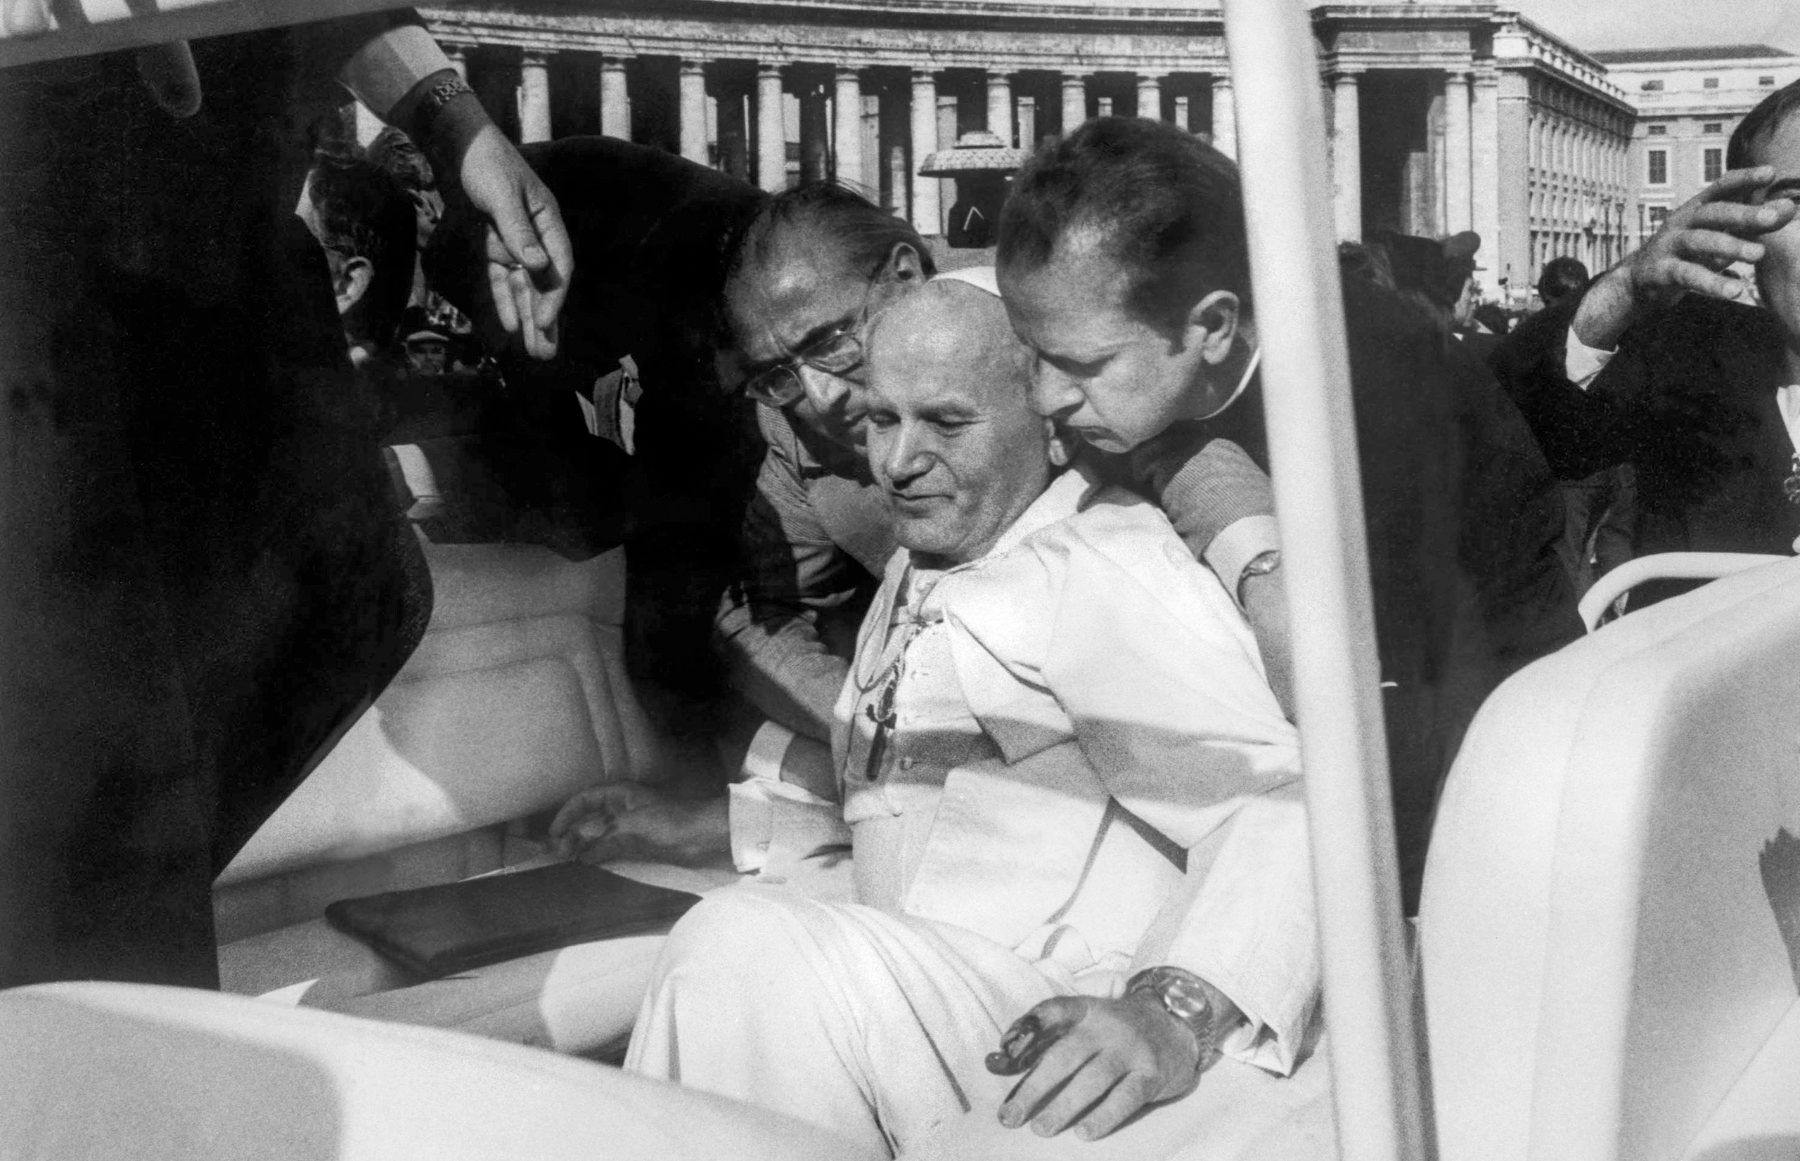 Blood on his hands John Paul II assisted by aides moments after he was shot in Saint Peter